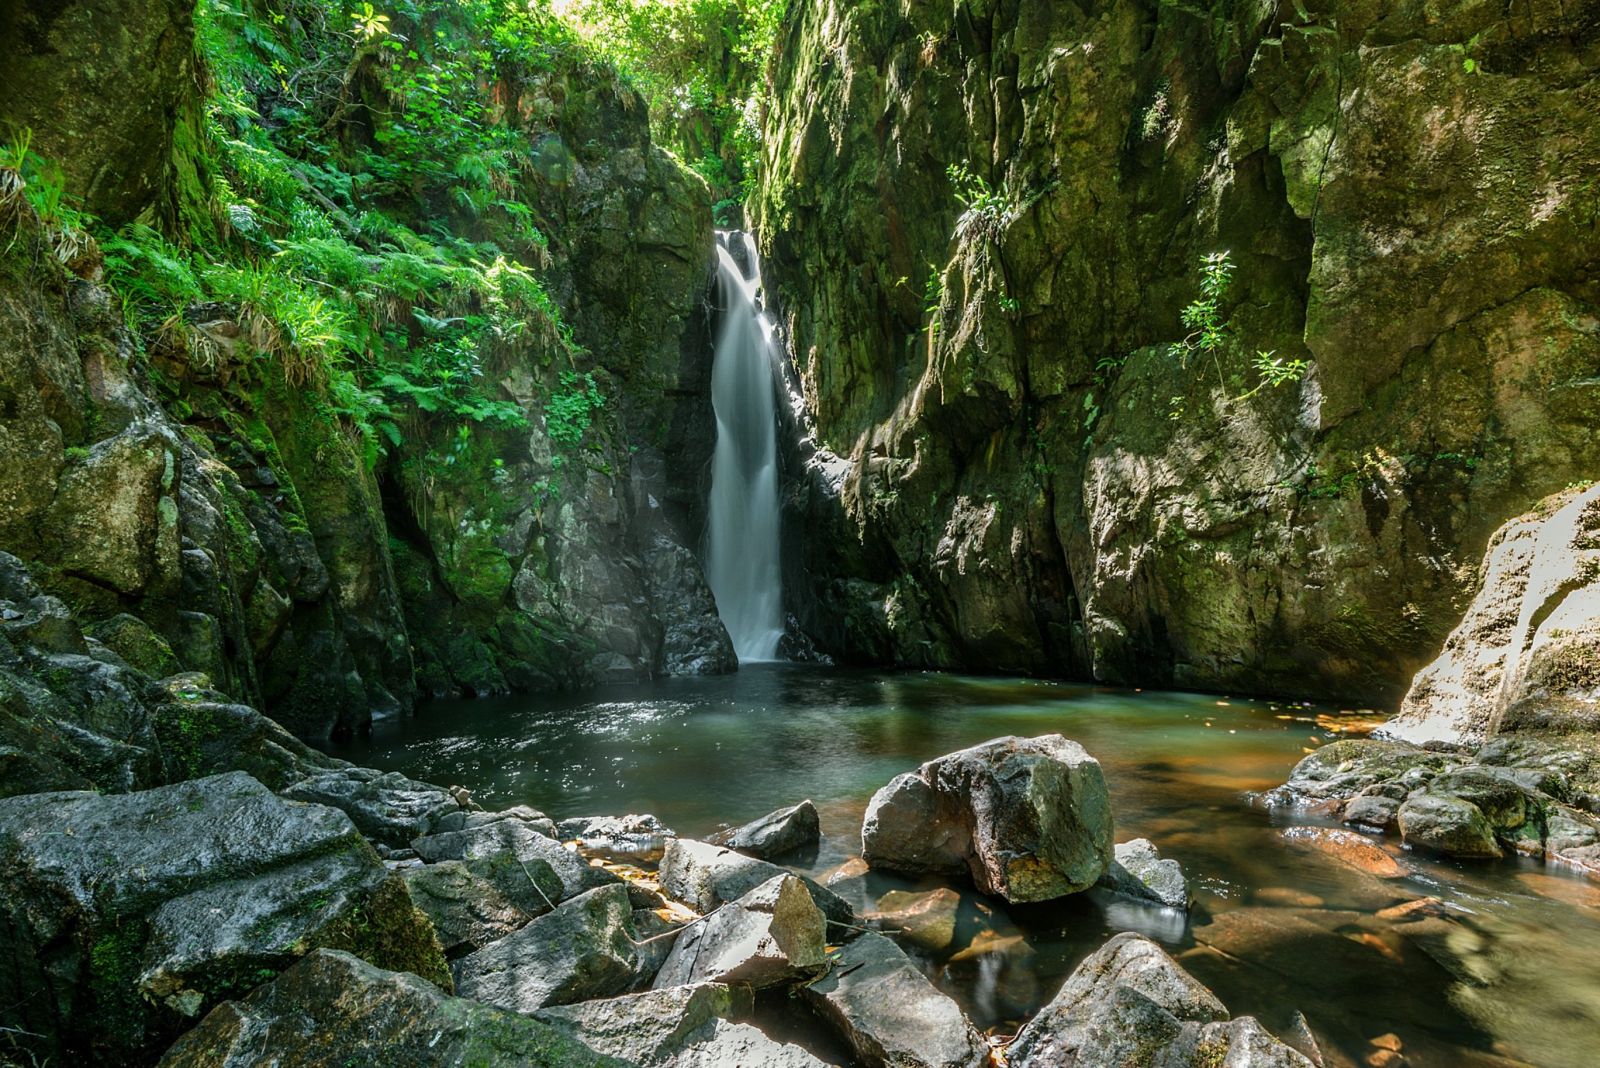 Stanley Ghyll 60ft waterfall is a stunning, shorter walk from the cottages